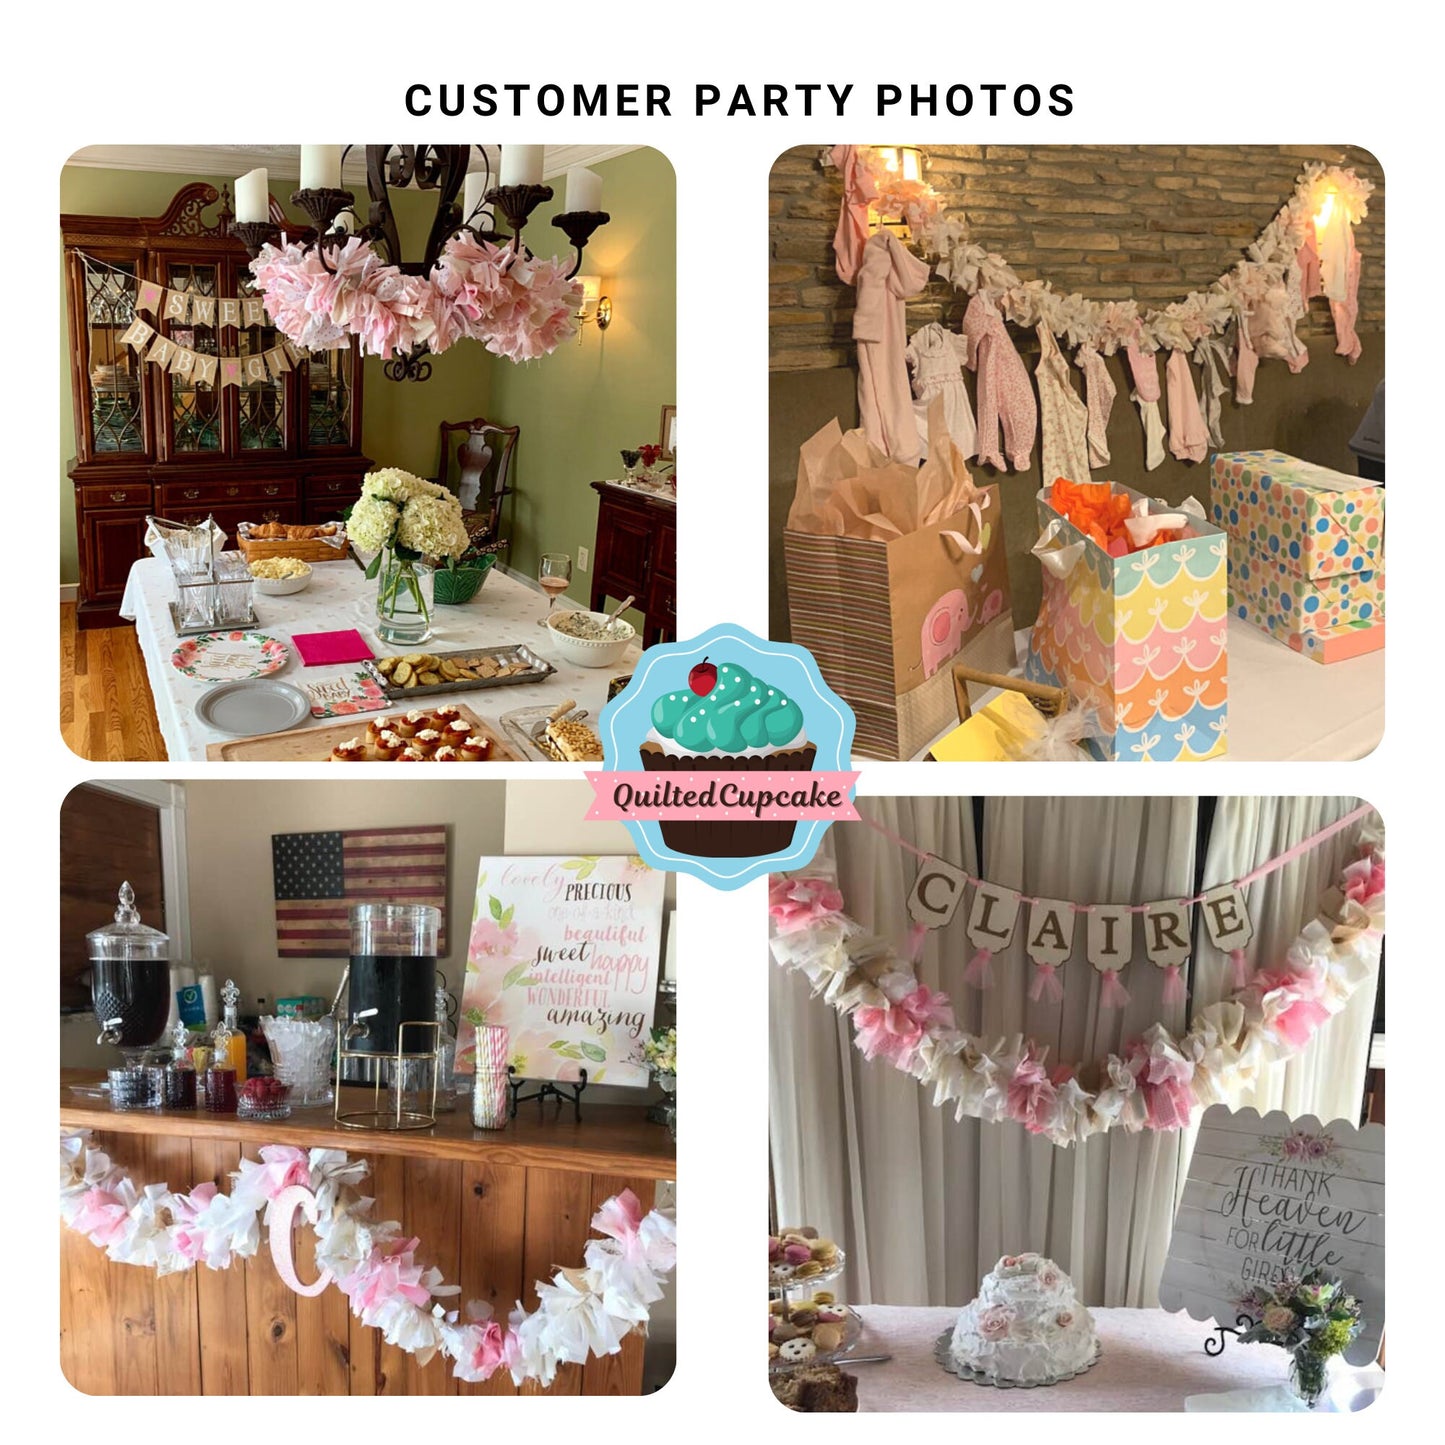 Baby Girl Burlap Shower Party Decoration.  6-10 foot fabric Garland Banner. Burlap and Pink Party Decor & Backdrop for Baby Girl Shower